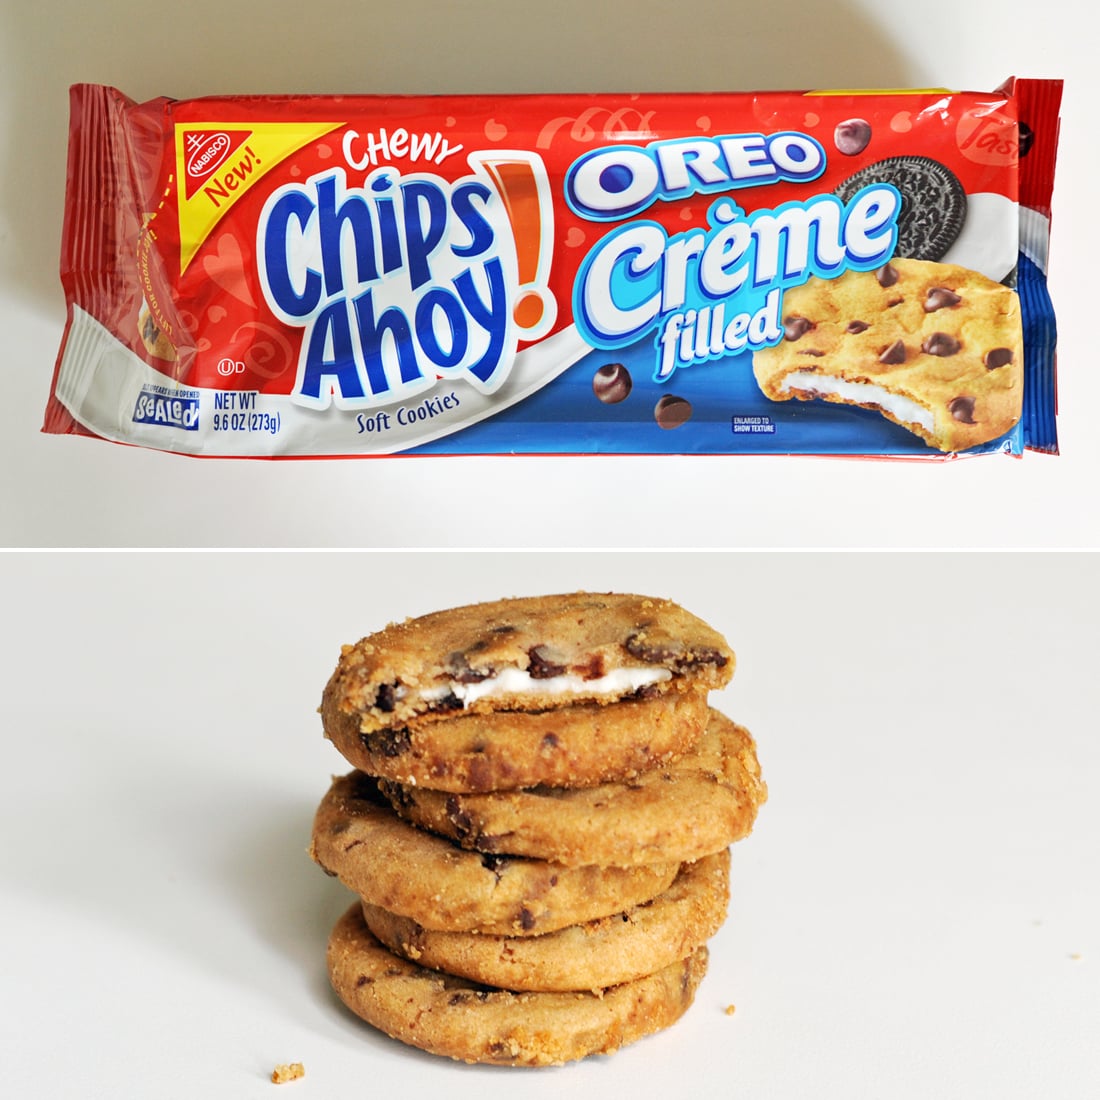 Oreo creme filled chips ahoy